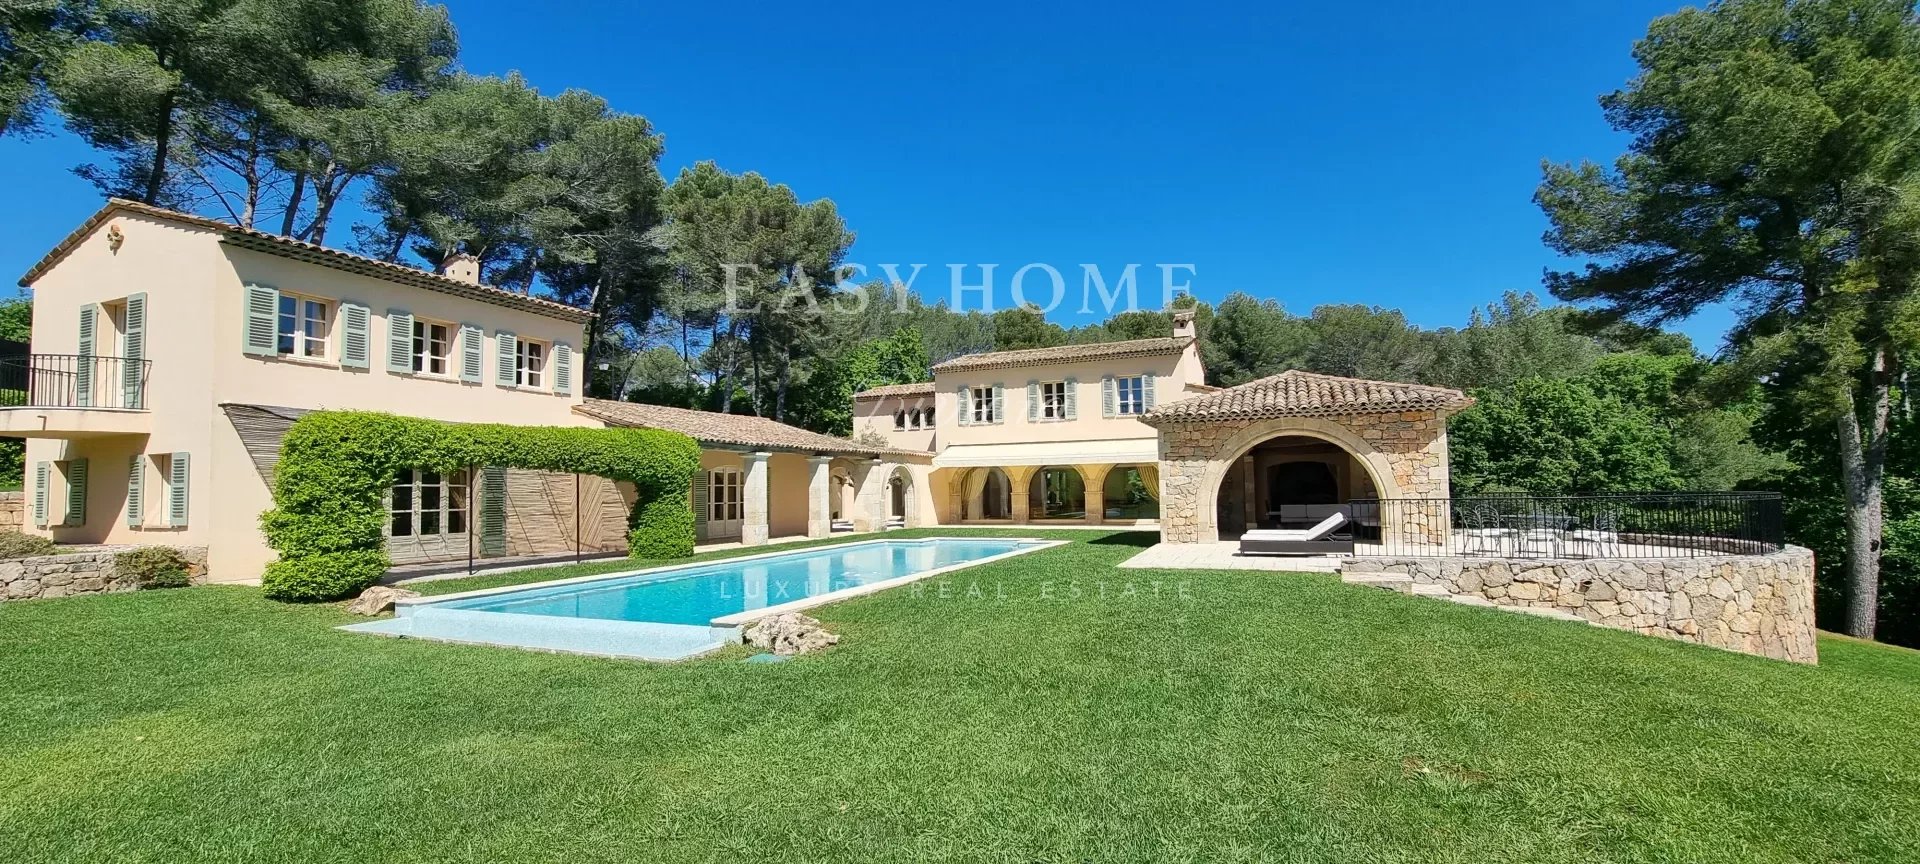 Villa Mougins house in french riviera